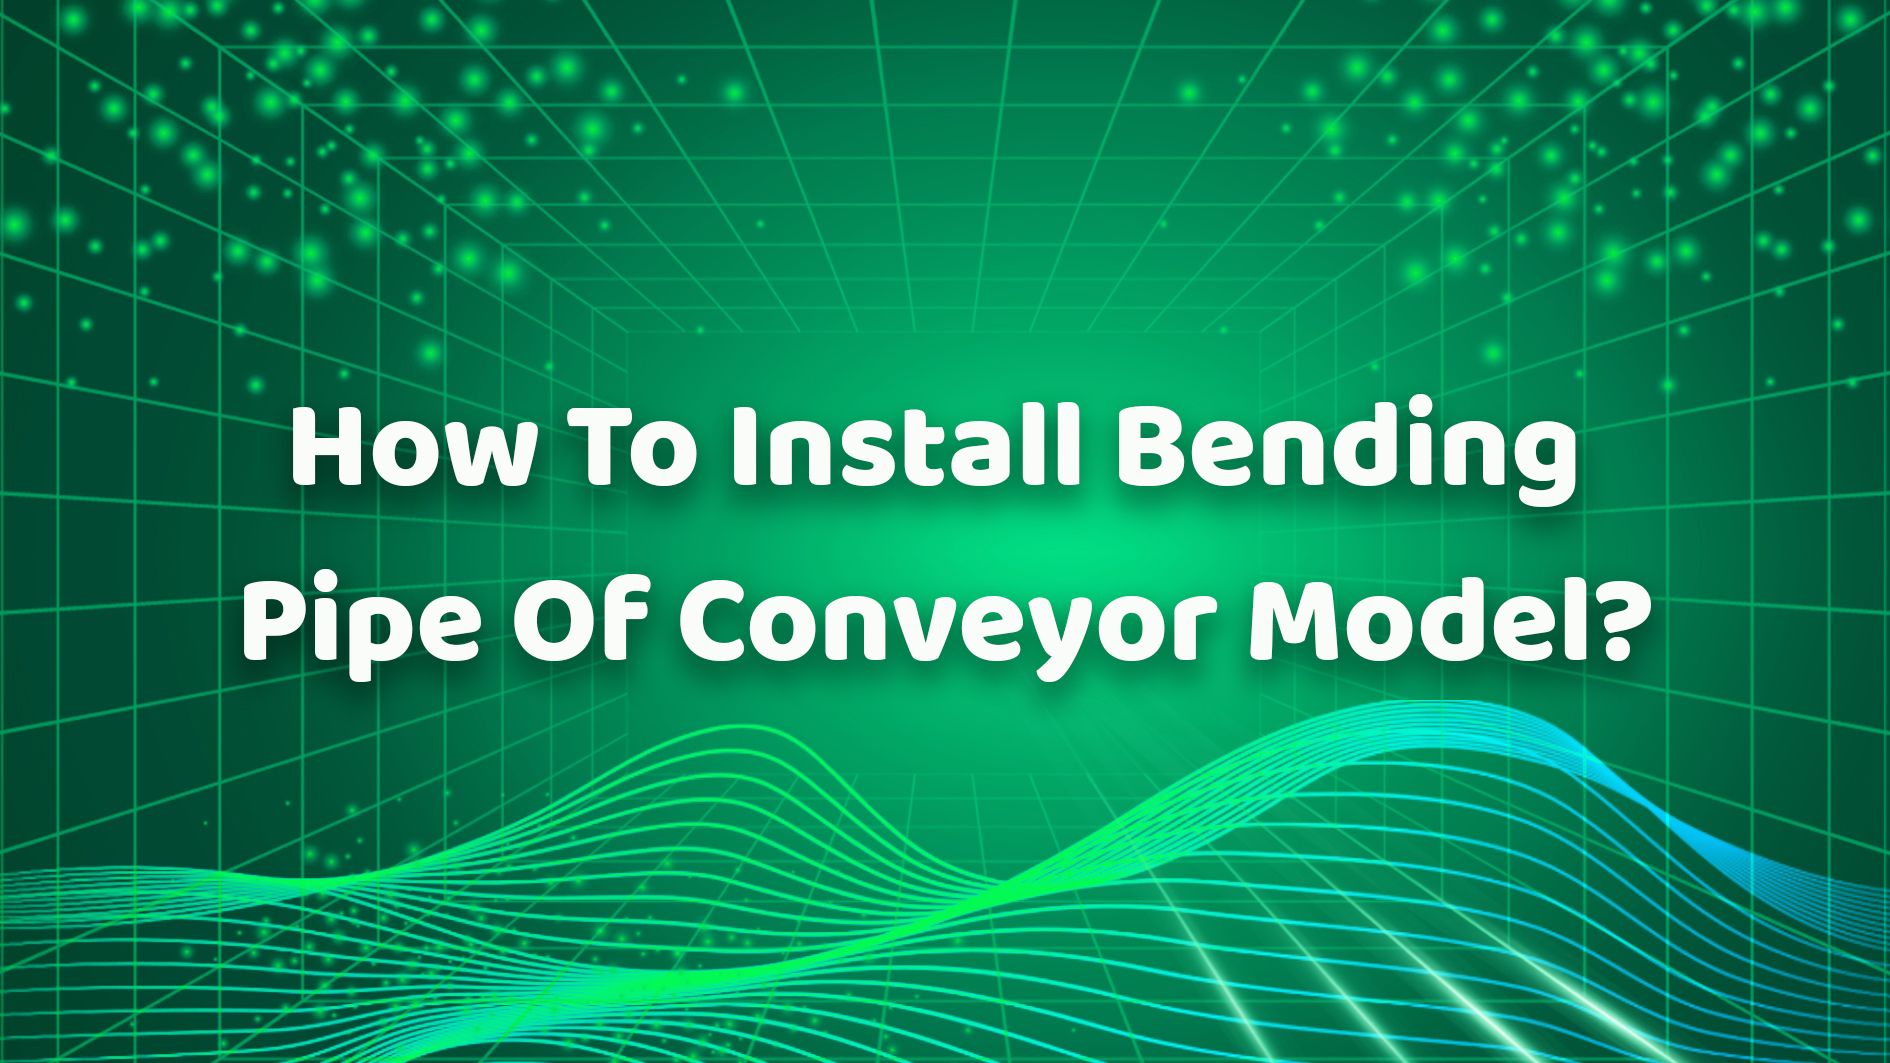 How To Install Bending Pipe Of Conveyor Model?